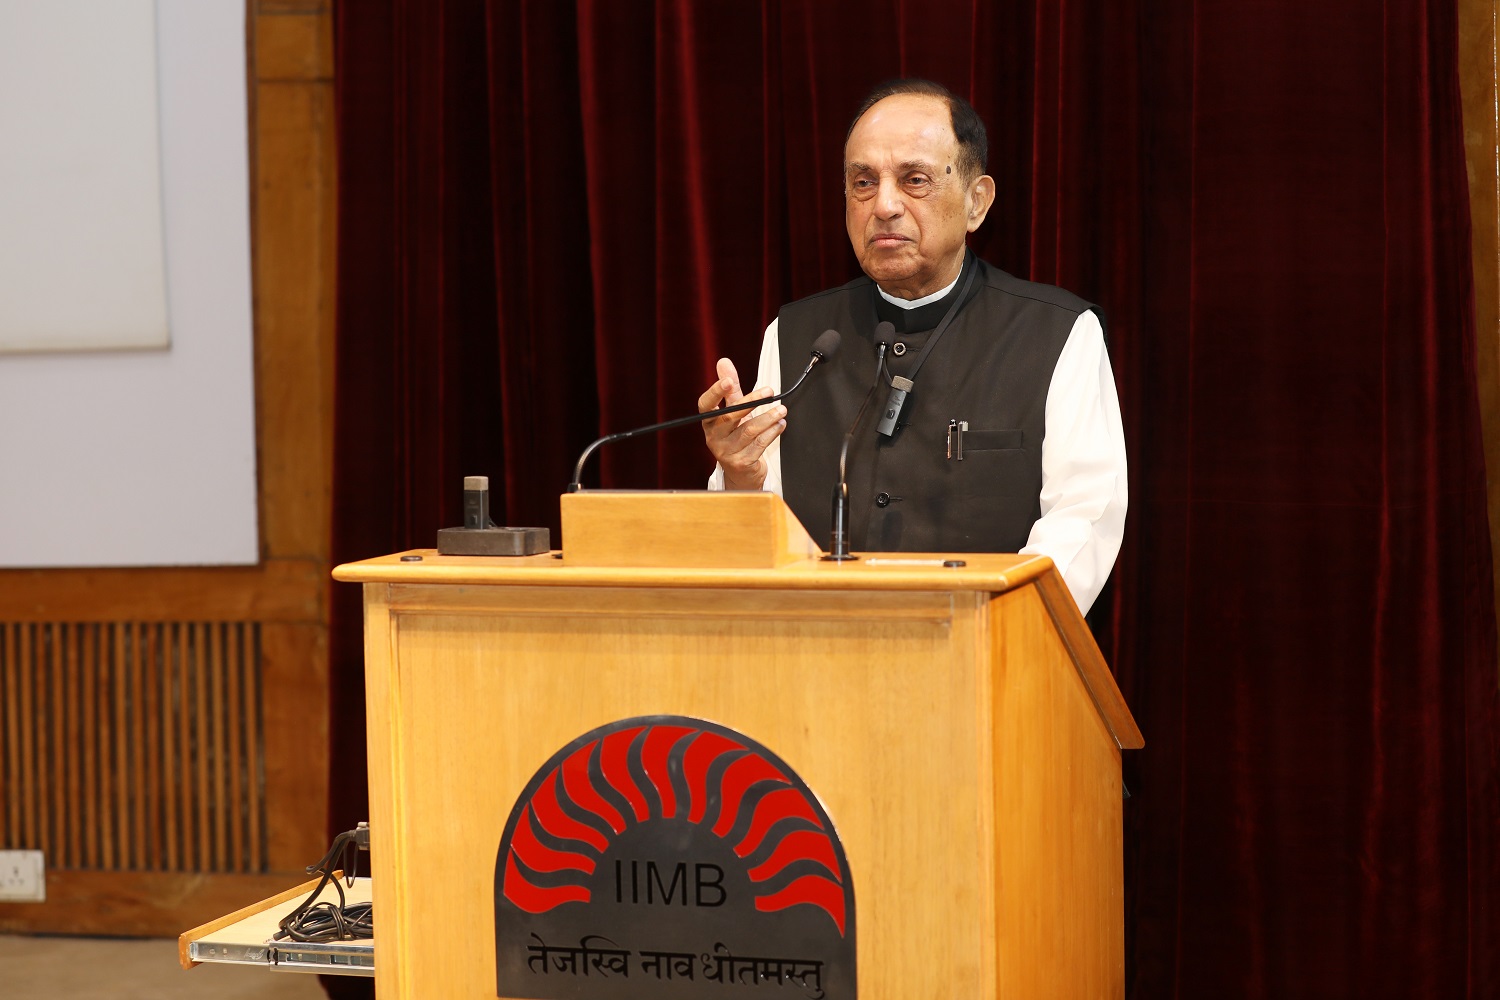 The Public Policy Club at IIMB hosted a speaker session by Dr. Subramanian Swamy, politician, economist and statistician, on management lessons from his personal journey. The session was moderated by Prof. Jitamitra Desai, faculty in the Decision Sciences area, on 3rd August 2023.